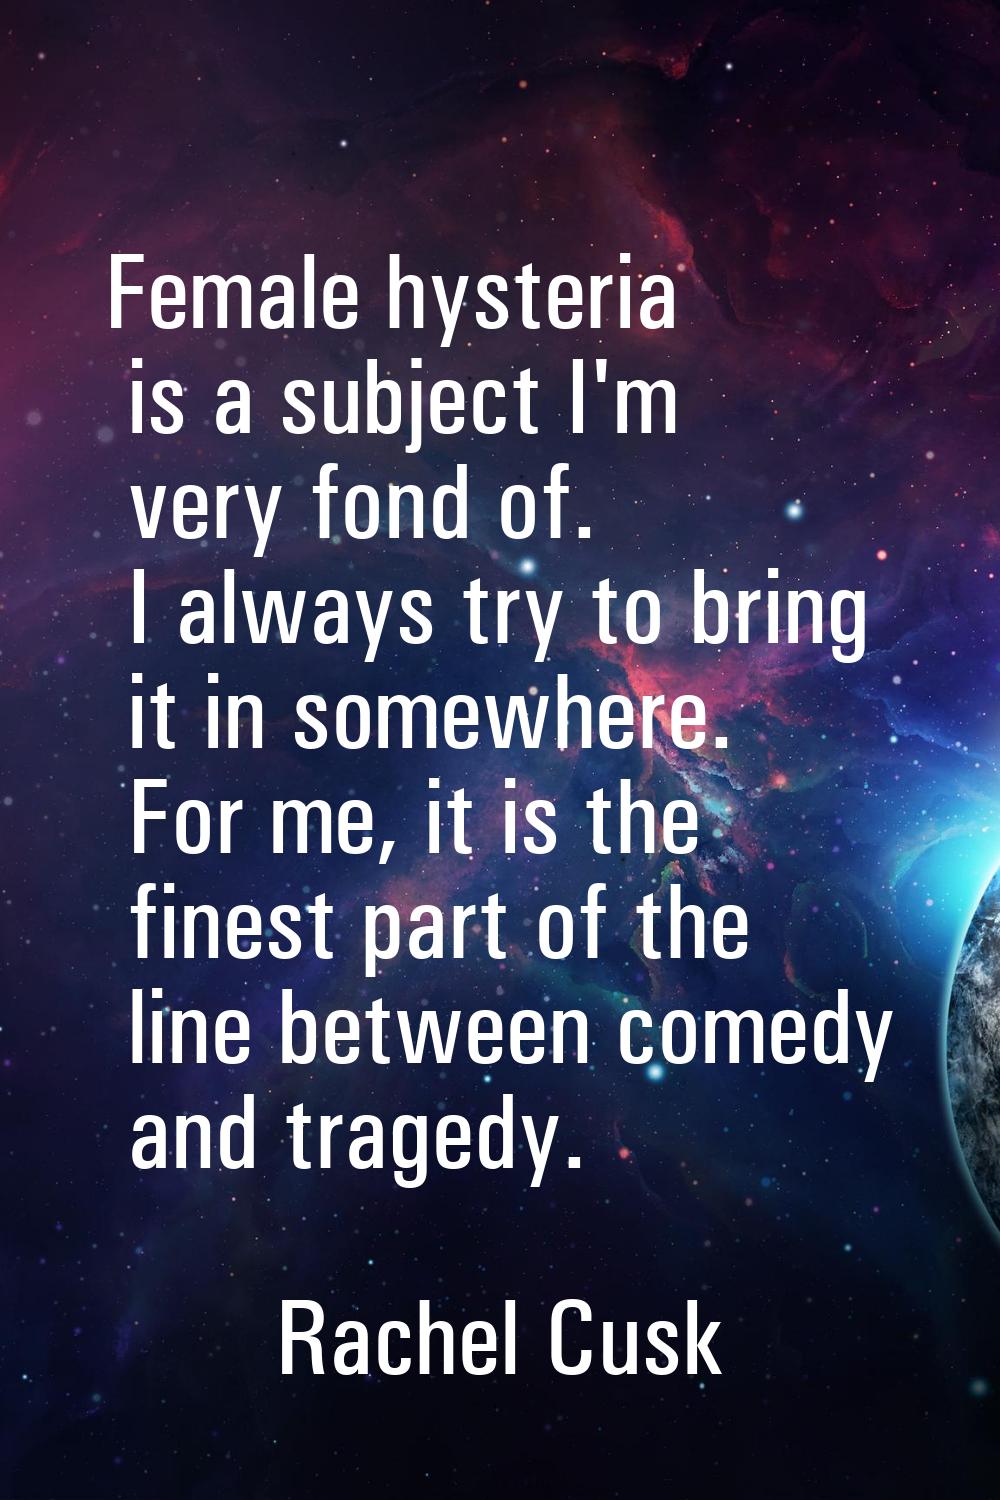 Female hysteria is a subject I'm very fond of. I always try to bring it in somewhere. For me, it is